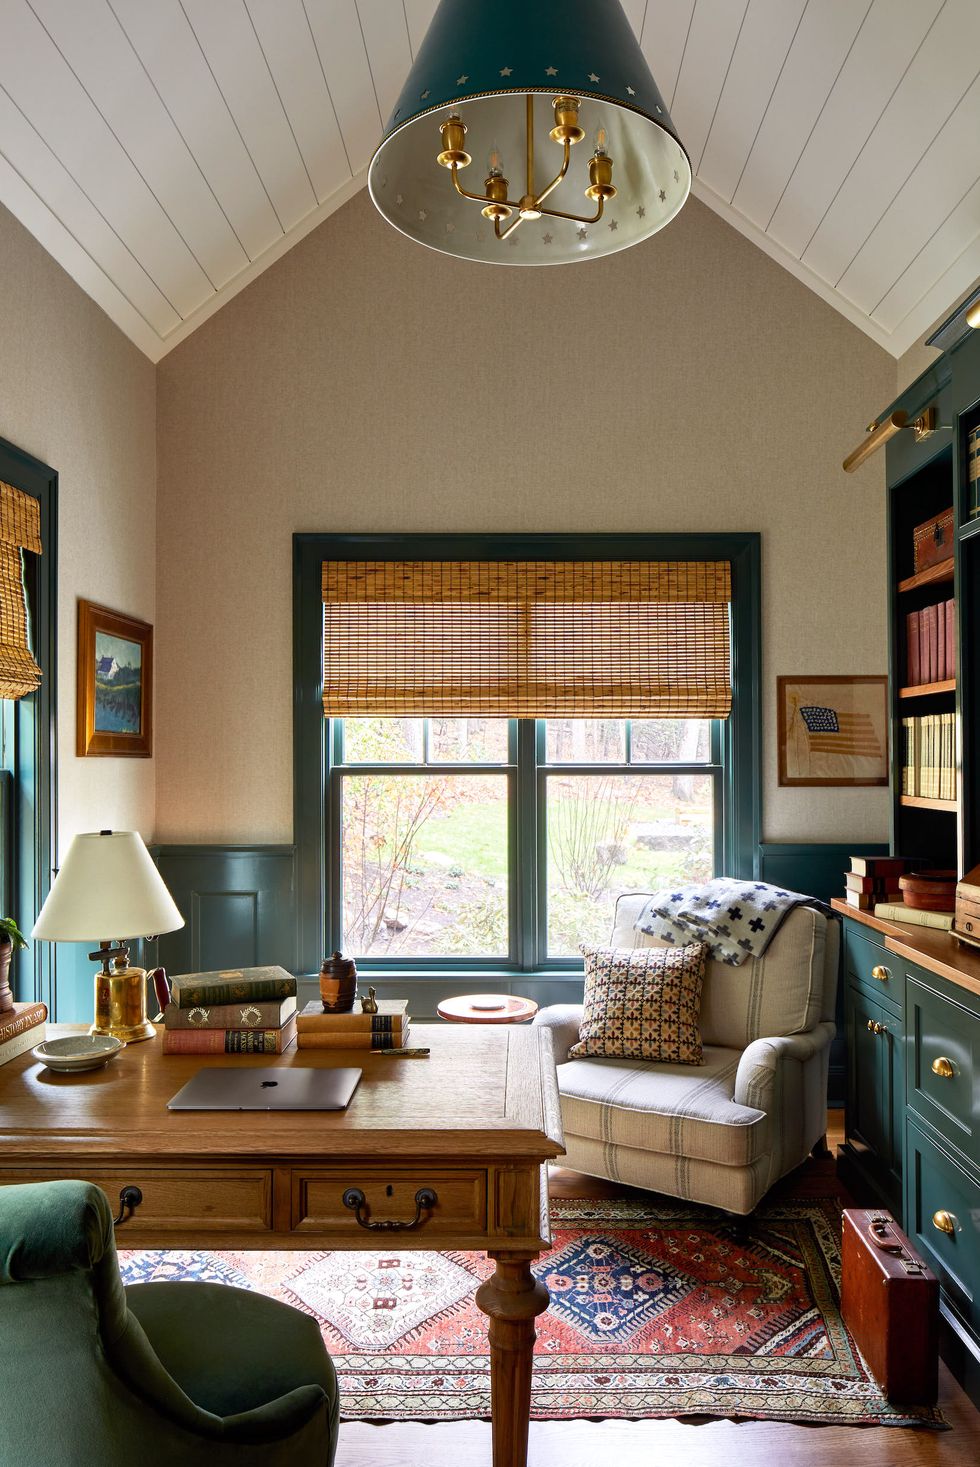 13 Beautiful Home Office Design Ideas to Show Your Personality